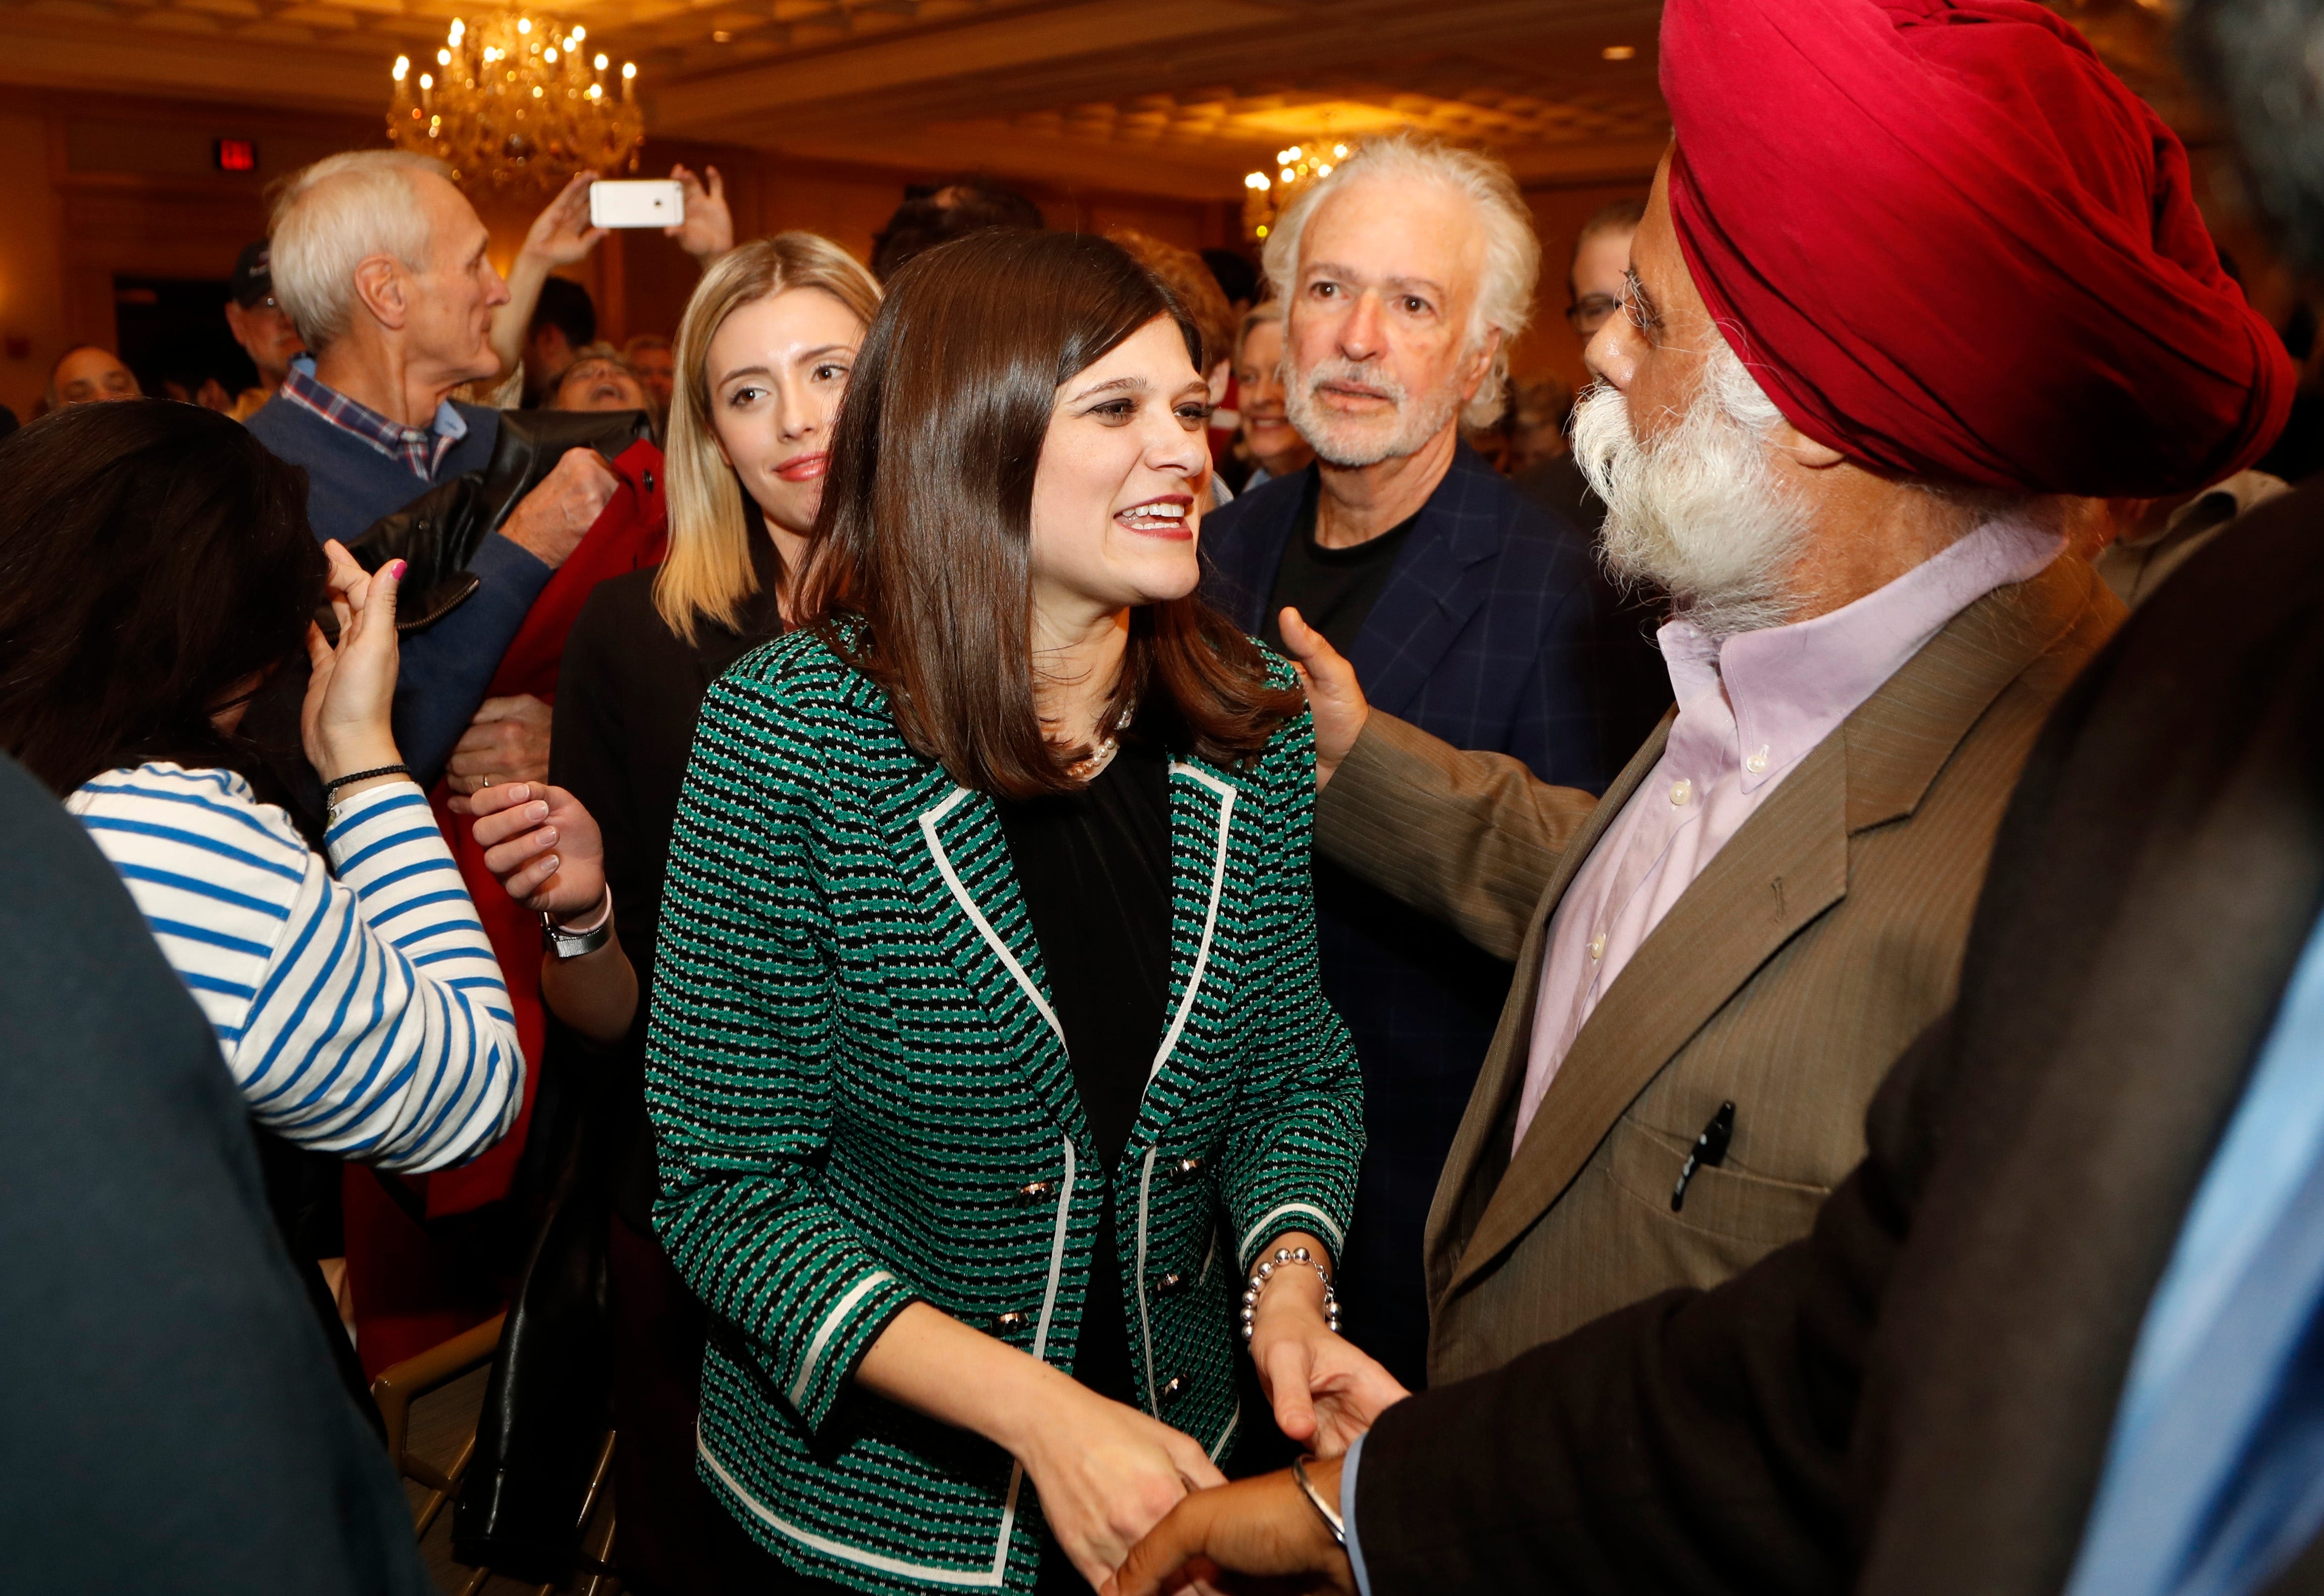 Haley Stevens, candidate for Michigan's 11th Congressional District seat,  greets supporters at an election night party in Birmingham.